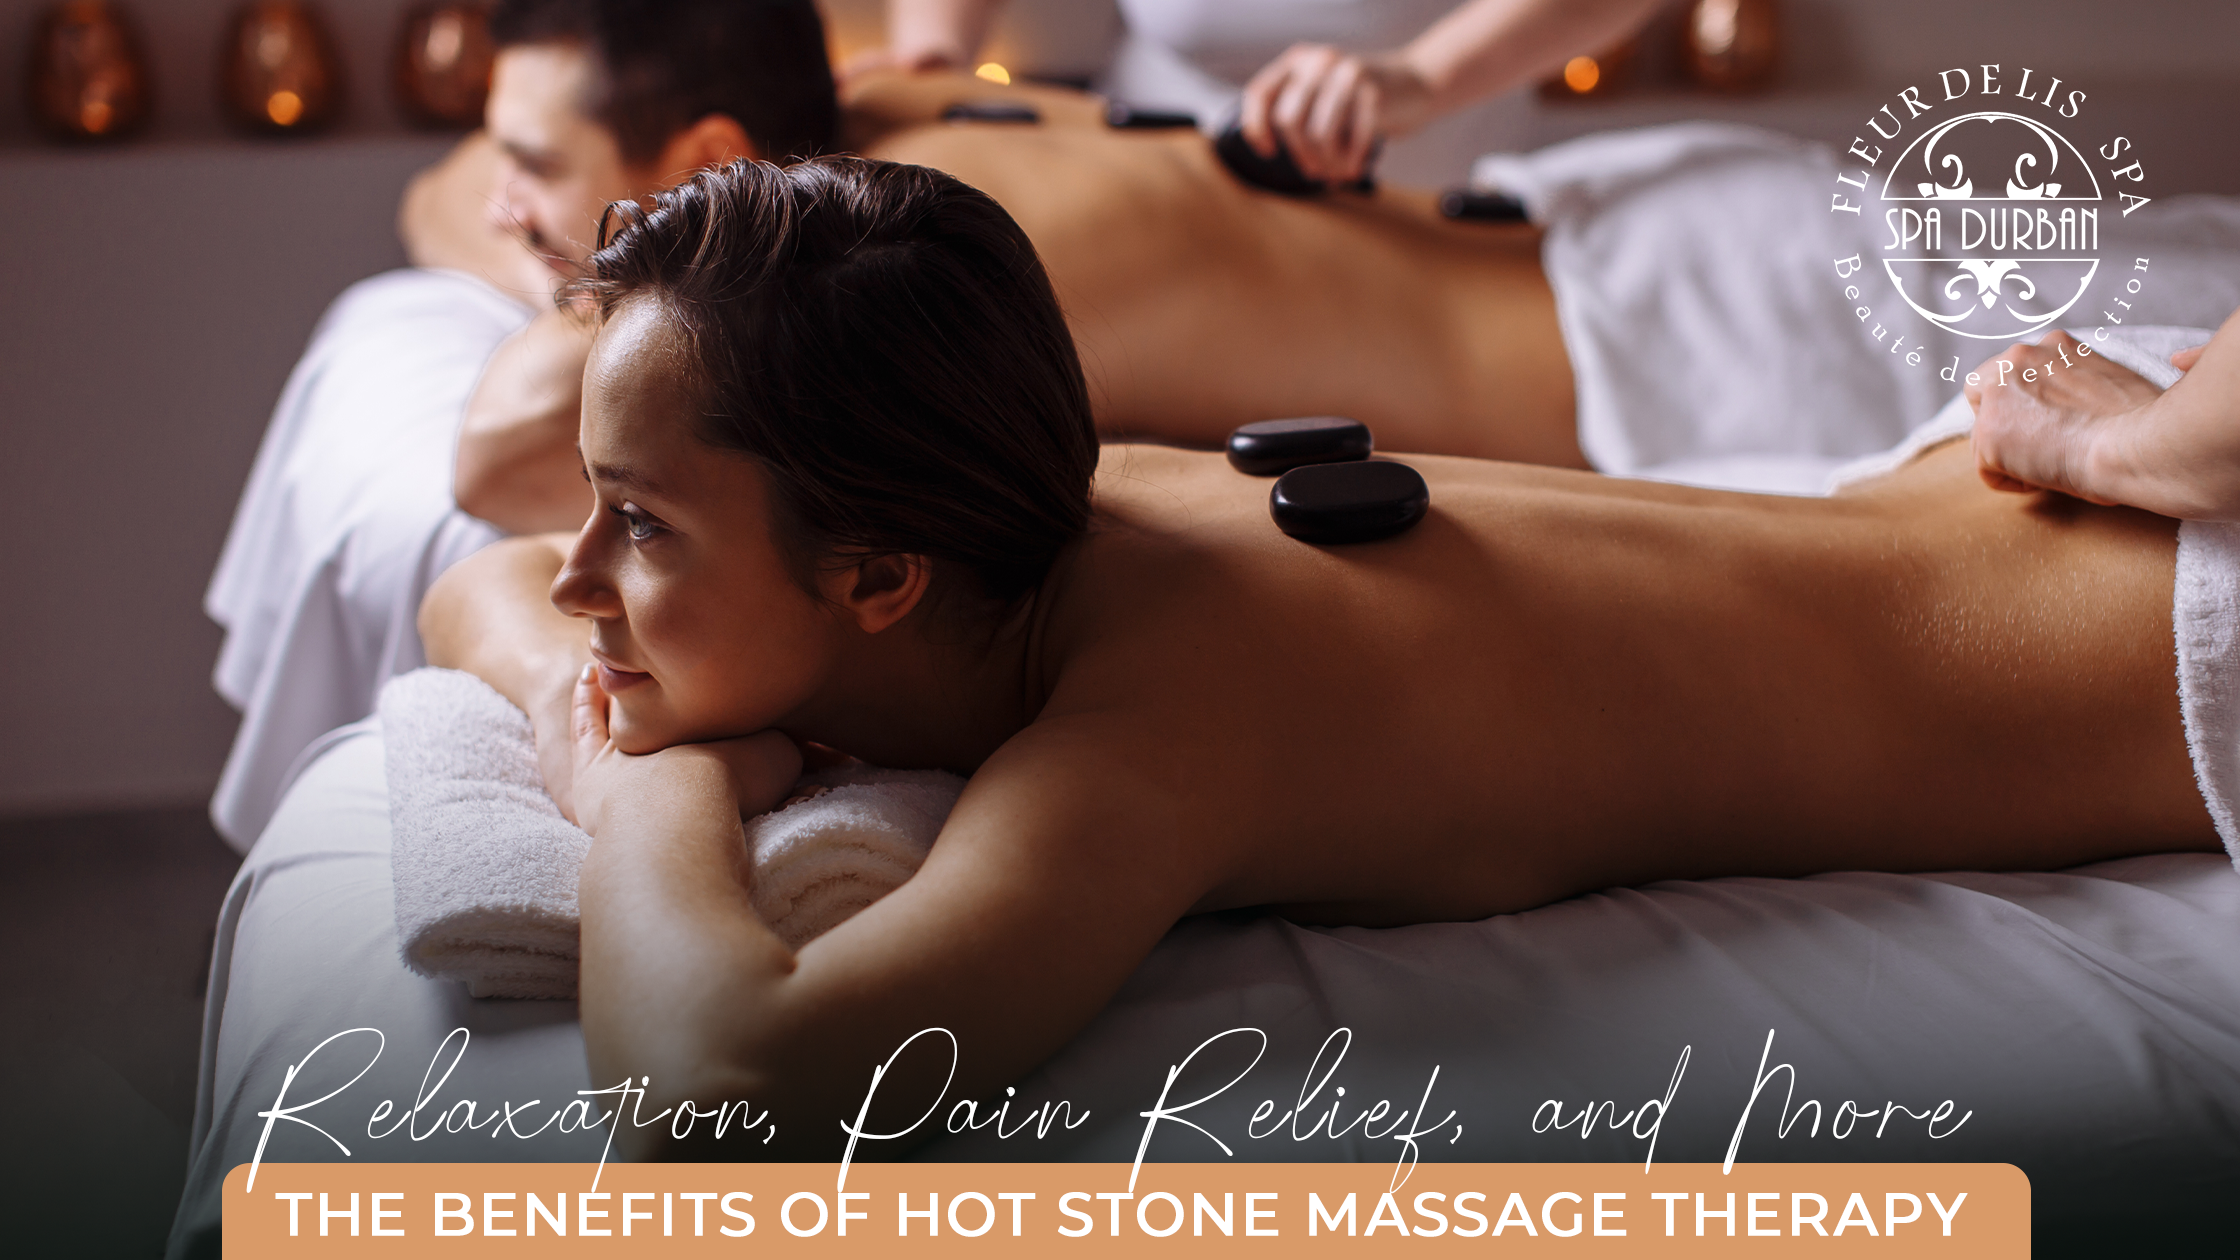 The Benefits of Hot Stone Massage Therapy: Relaxation, Pain Relief, and More